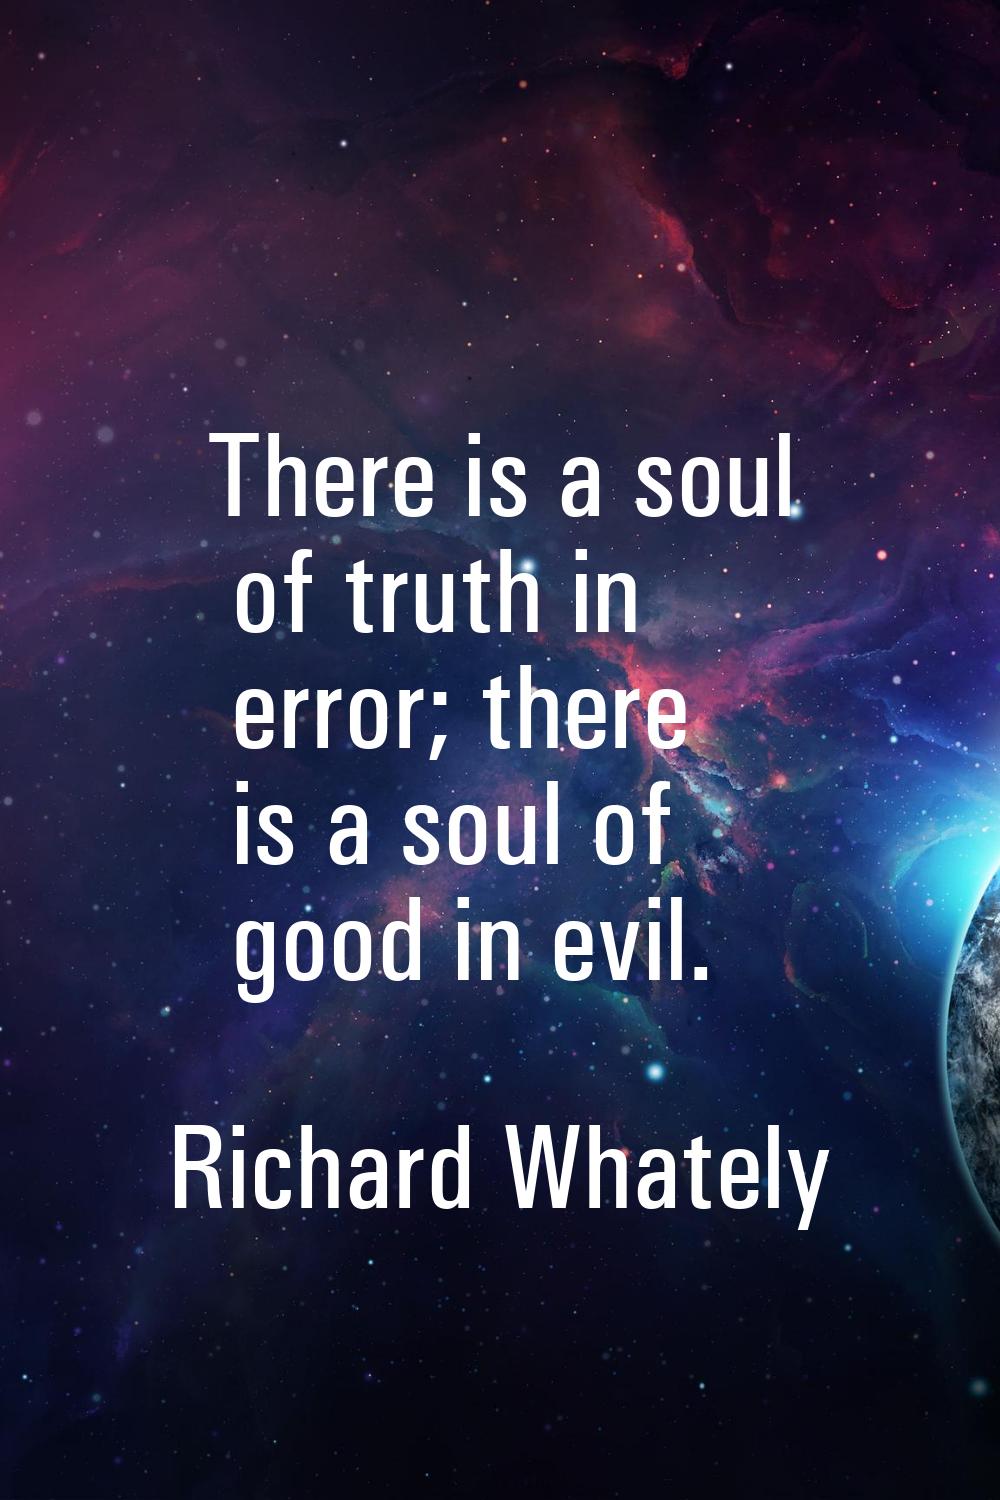 There is a soul of truth in error; there is a soul of good in evil.